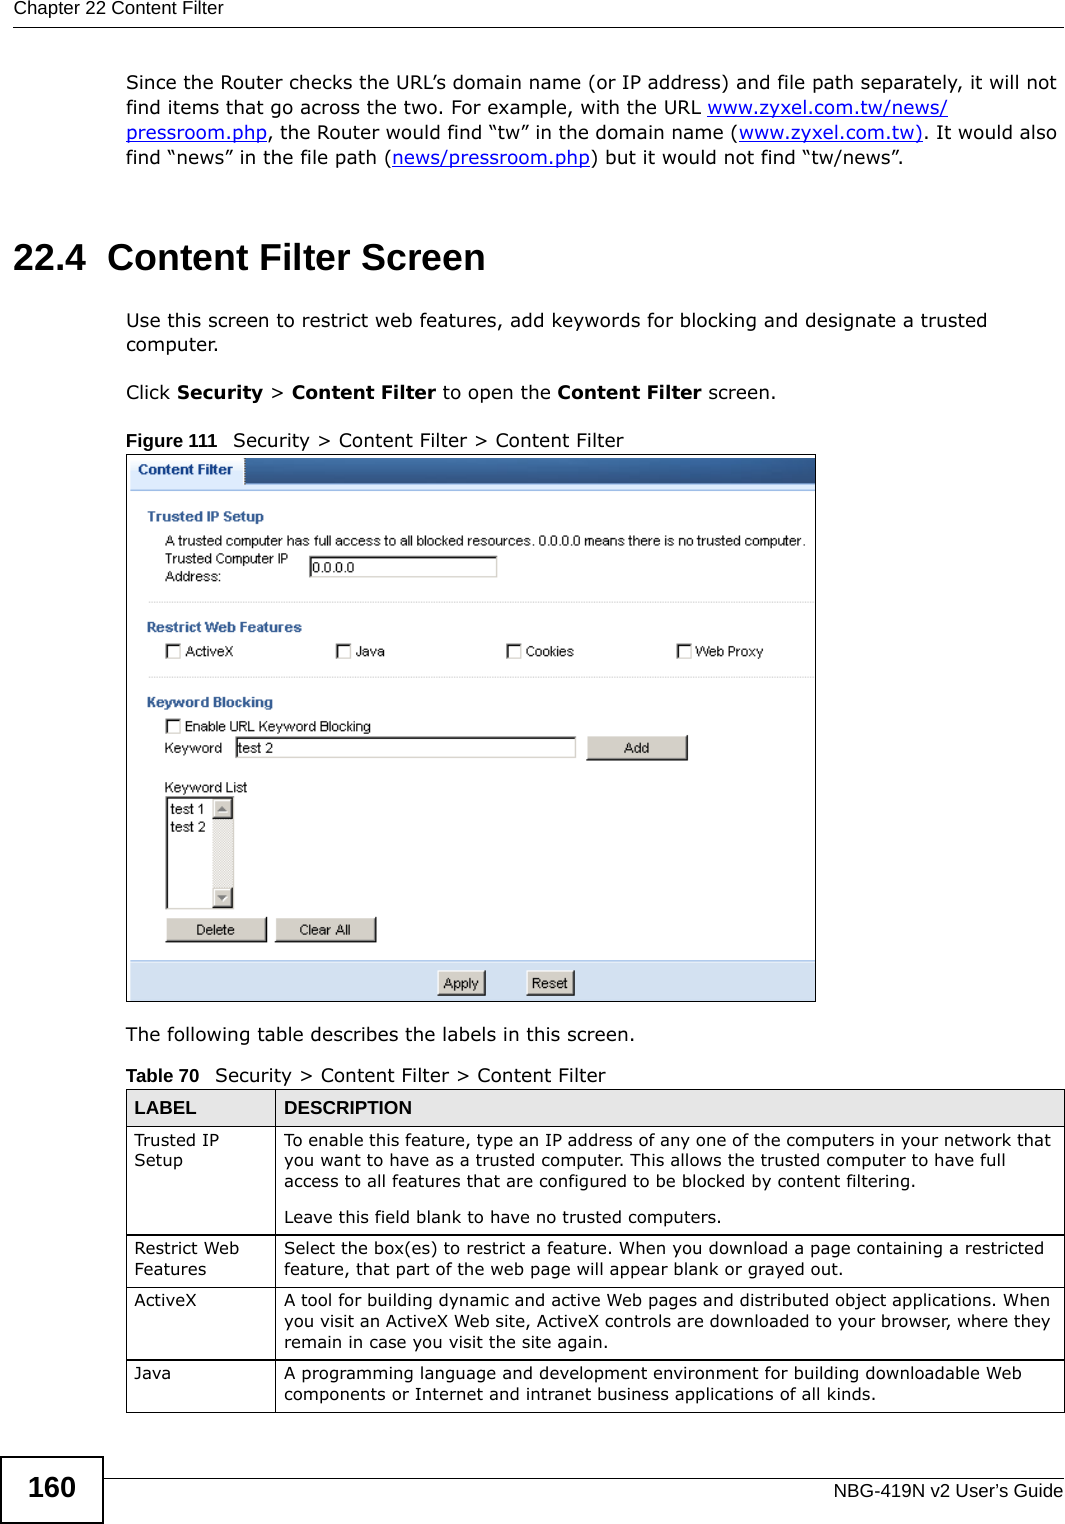 Chapter 22 Content FilterNBG-419N v2 User’s Guide160Since the Router checks the URL’s domain name (or IP address) and file path separately, it will not find items that go across the two. For example, with the URL www.zyxel.com.tw/news/pressroom.php, the Router would find “tw” in the domain name (www.zyxel.com.tw). It would also find “news” in the file path (news/pressroom.php) but it would not find “tw/news”.22.4  Content Filter ScreenUse this screen to restrict web features, add keywords for blocking and designate a trusted computer. Click Security &gt; Content Filter to open the Content Filter screen. Figure 111   Security &gt; Content Filter &gt; Content Filter The following table describes the labels in this screen.Table 70   Security &gt; Content Filter &gt; Content FilterLABEL DESCRIPTIONTrusted IP SetupTo enable this feature, type an IP address of any one of the computers in your network that you want to have as a trusted computer. This allows the trusted computer to have full access to all features that are configured to be blocked by content filtering.Leave this field blank to have no trusted computers.Restrict Web FeaturesSelect the box(es) to restrict a feature. When you download a page containing a restricted feature, that part of the web page will appear blank or grayed out.ActiveX  A tool for building dynamic and active Web pages and distributed object applications. When you visit an ActiveX Web site, ActiveX controls are downloaded to your browser, where they remain in case you visit the site again. Java A programming language and development environment for building downloadable Web components or Internet and intranet business applications of all kinds.